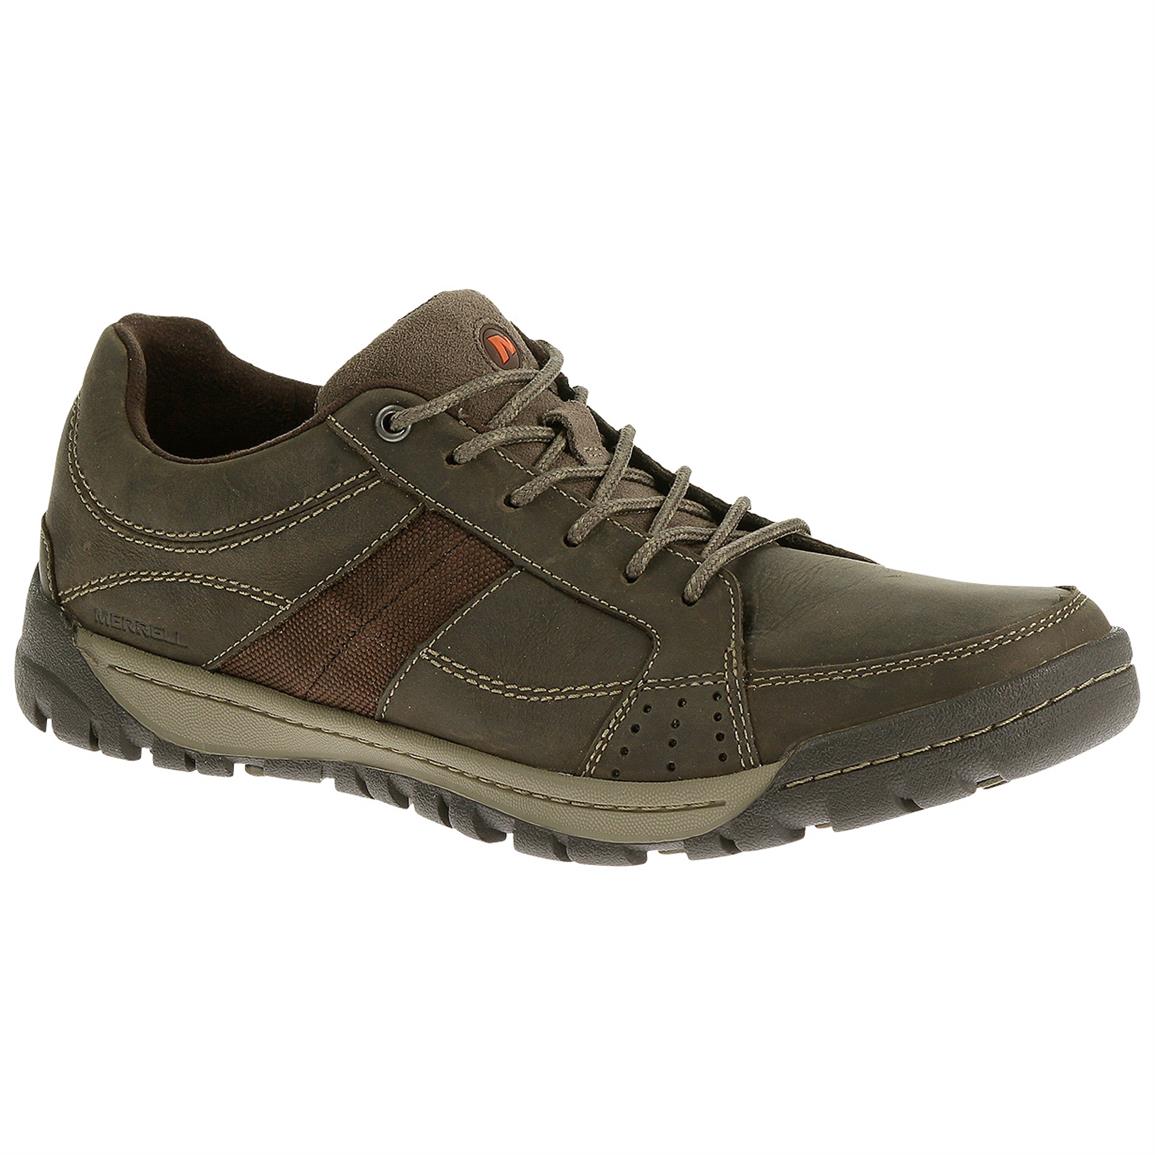 Merrell Traveler Point Shoes - 617450, Casual Shoes at Sportsman's Guide